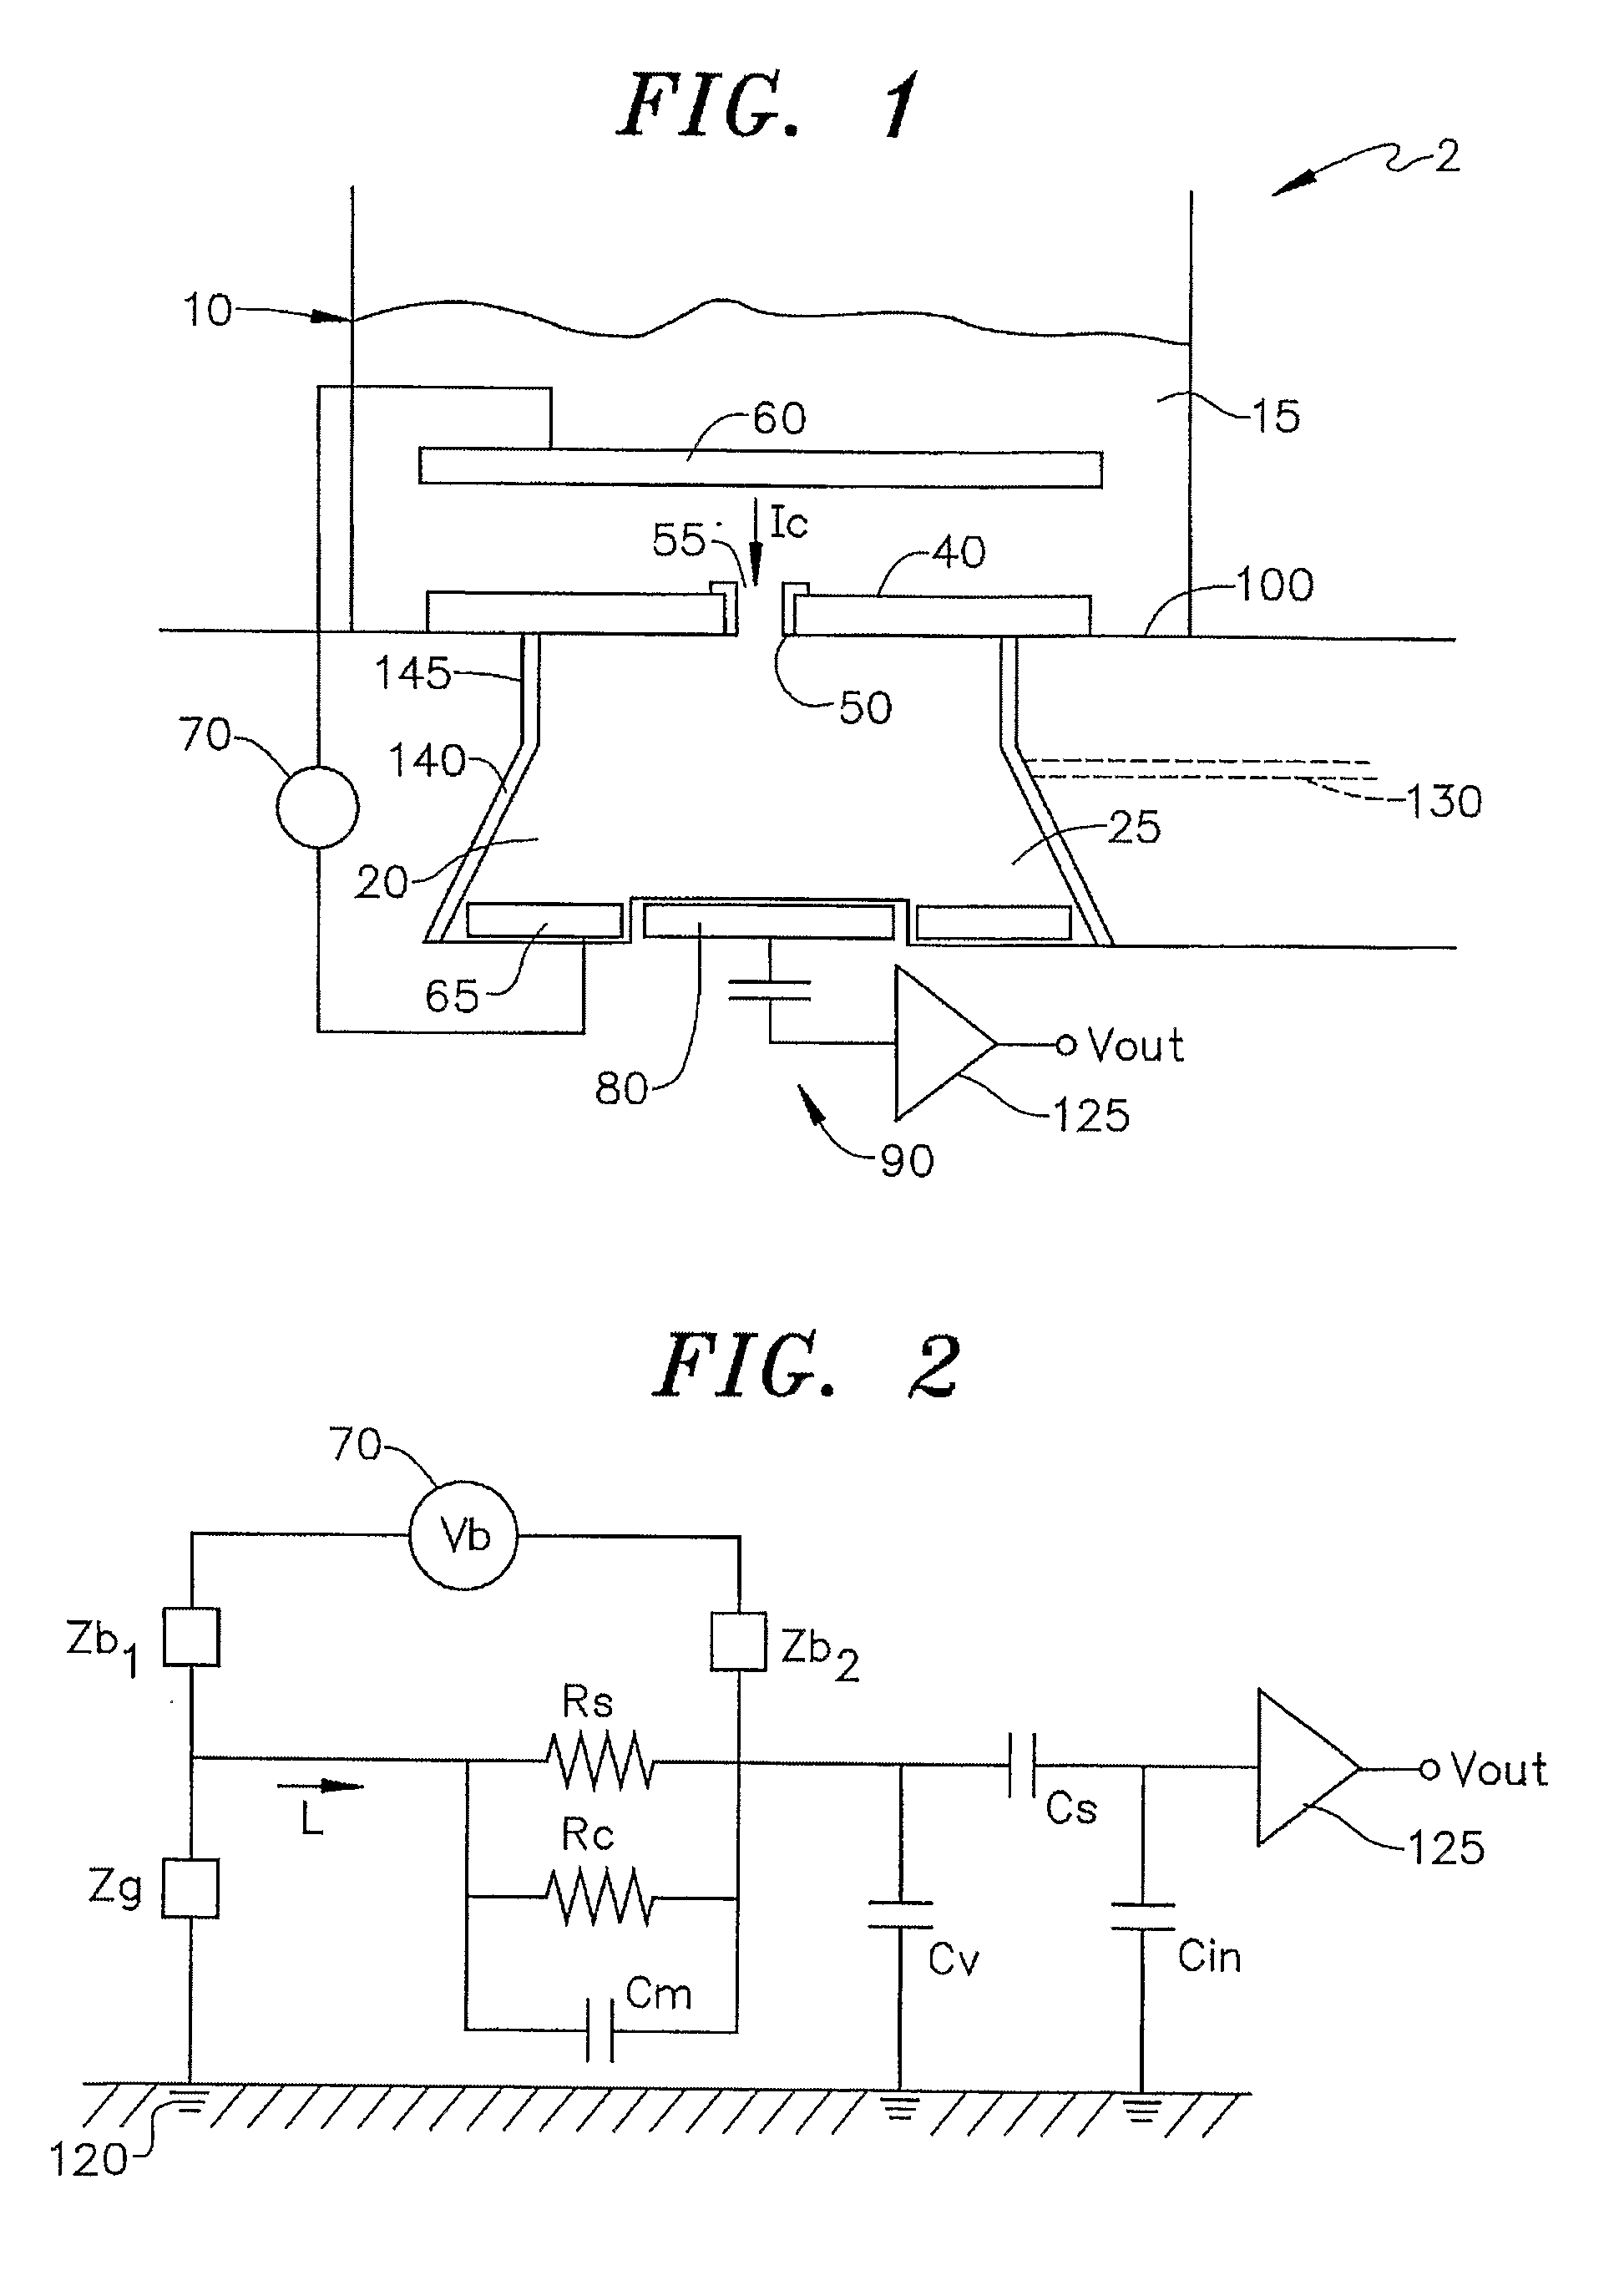 Method And Apparatus For Sensing A Time Varying Current Passing Through An Ion Channel